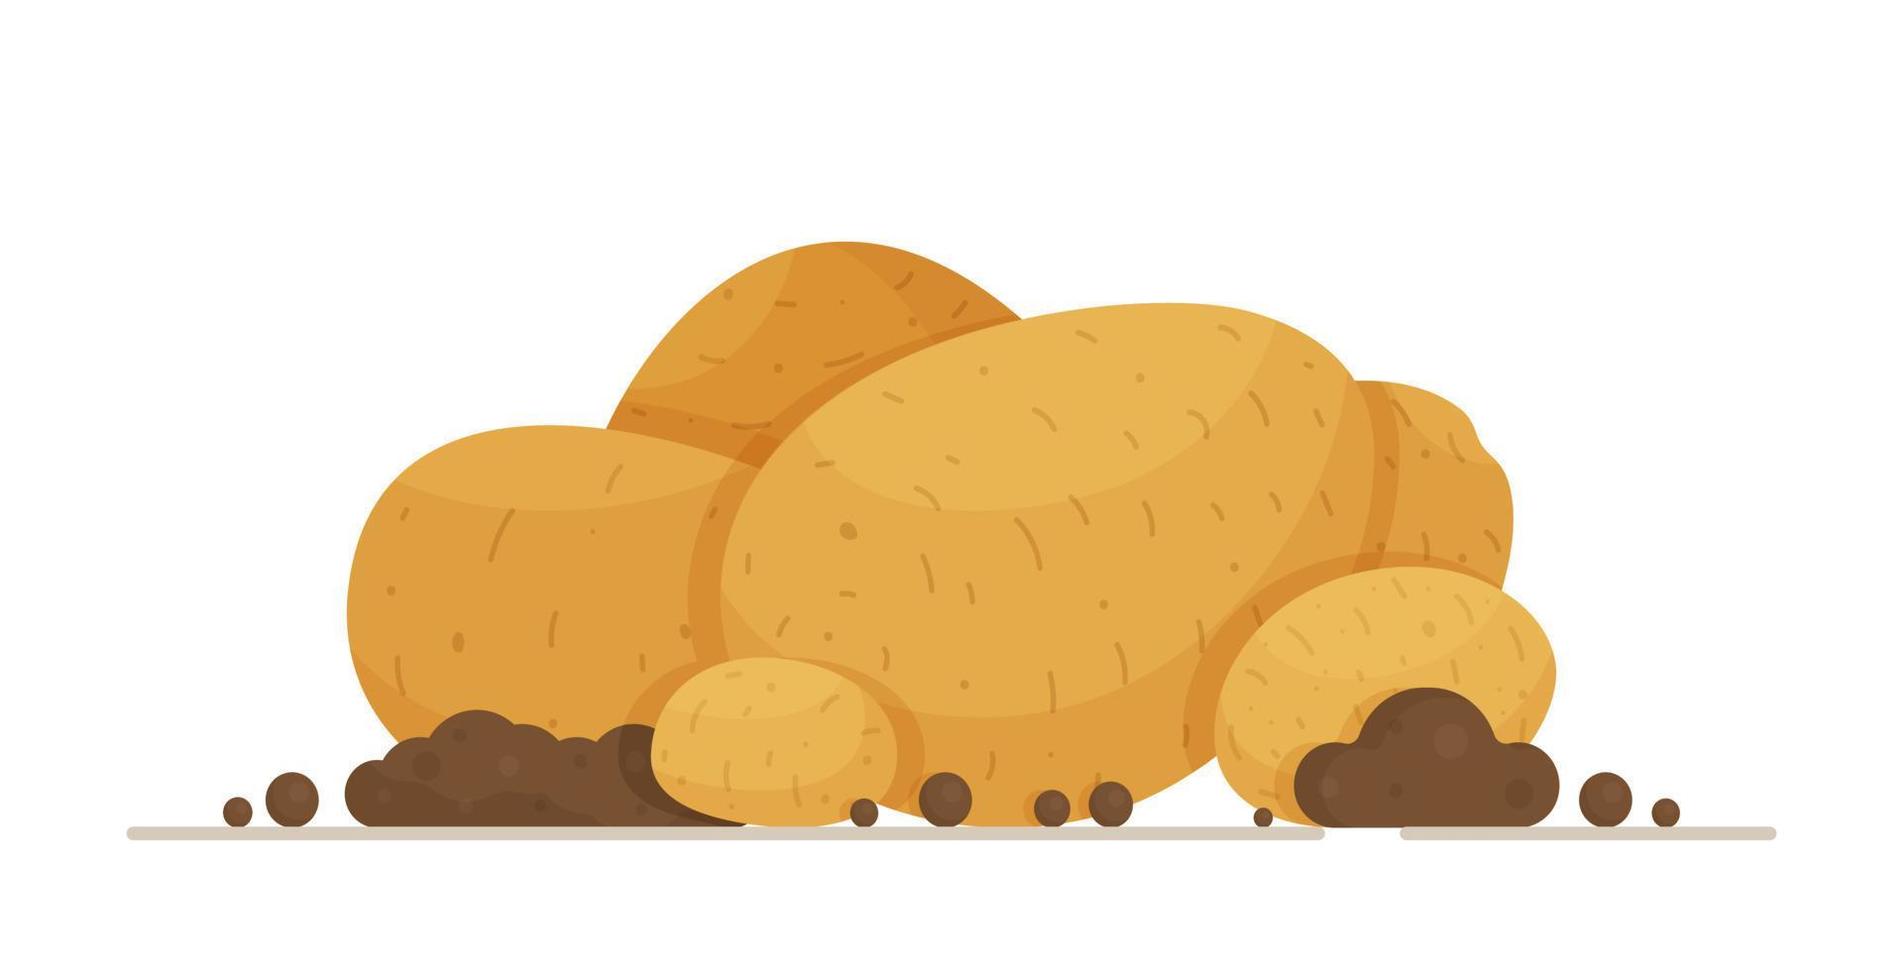 A banner of dirty, large potatoes. Vector illustration of a vegetable. Light potato tubers of different shapes and sizes.